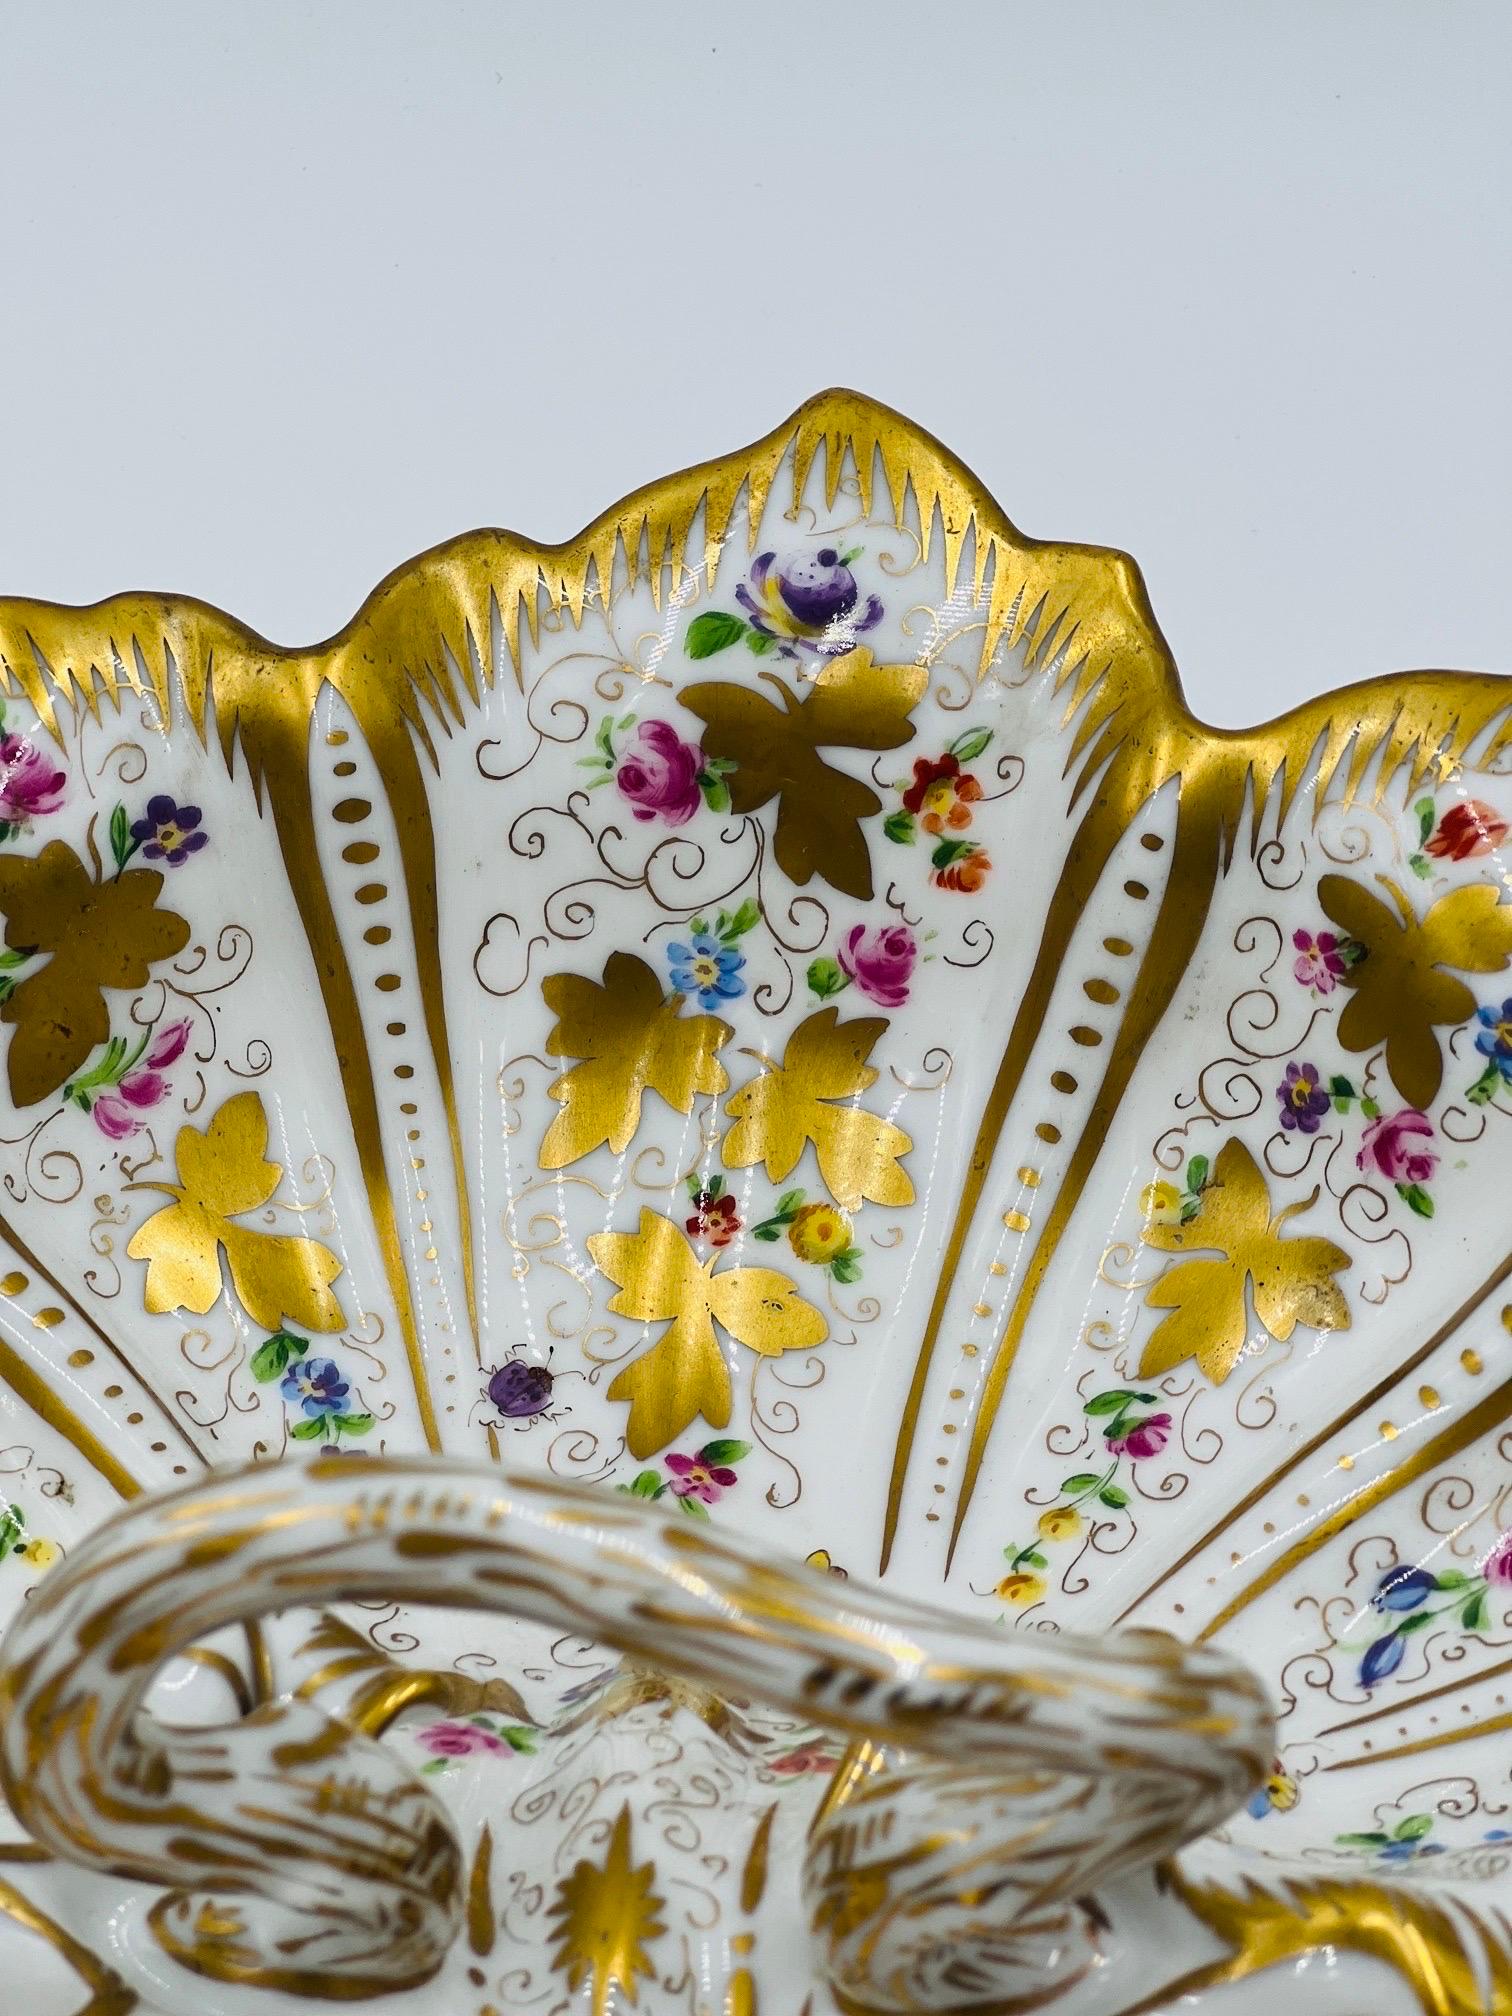 Antique Ornate CT Carl Tielsch Germany Floral Divided Handled Dish Herend Style For Sale 1